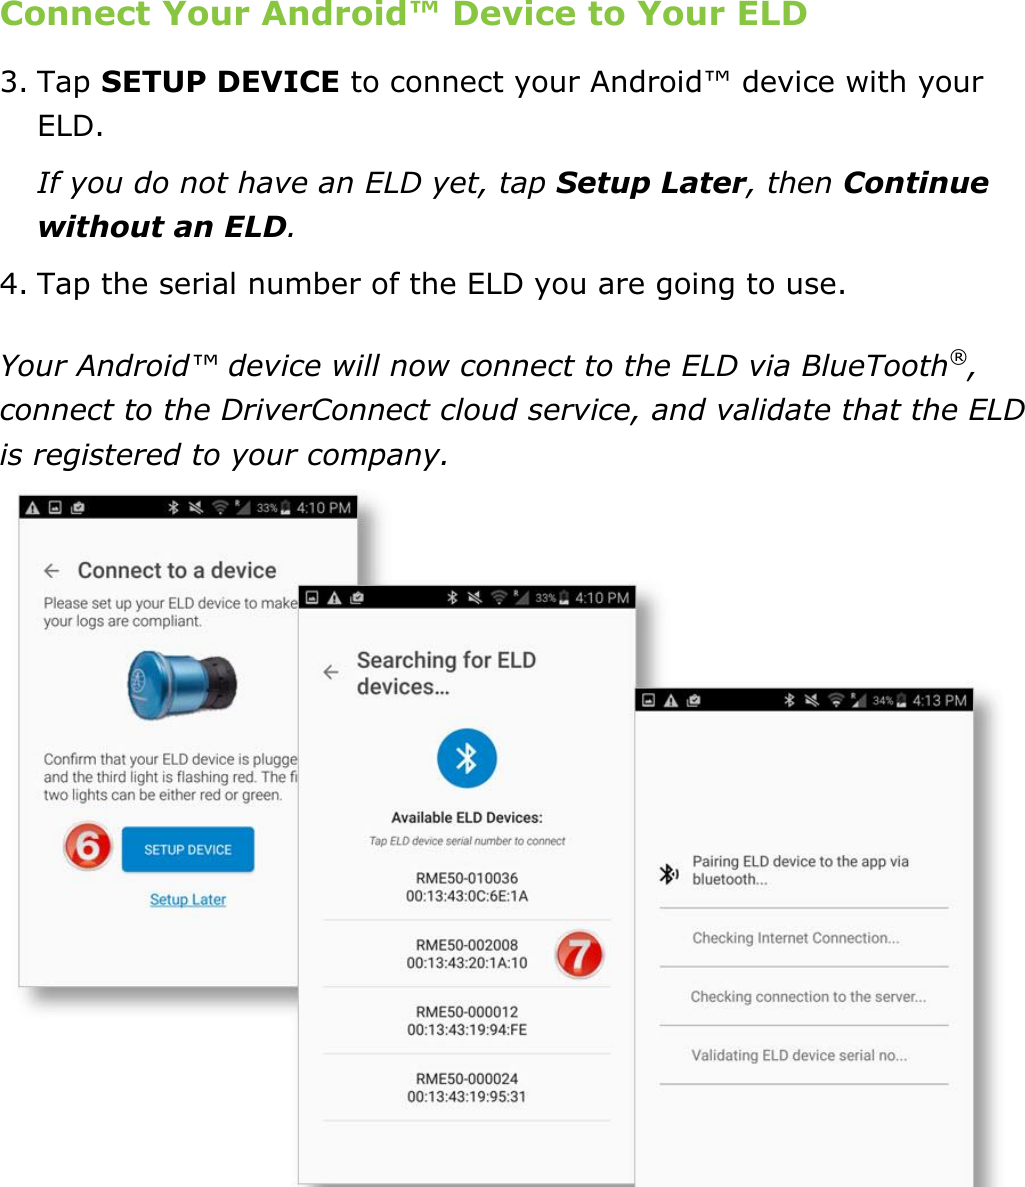 Set My Duty Status DriverConnect User Guide  16 © 2017, Rand McNally, Inc. Connect Your Android™ Device to Your ELD 3. Tap SETUP DEVICE to connect your Android™ device with your ELD. If you do not have an ELD yet, tap Setup Later, then Continue without an ELD. 4. Tap the serial number of the ELD you are going to use. Your Android™ device will now connect to the ELD via BlueTooth®, connect to the DriverConnect cloud service, and validate that the ELD is registered to your company.    